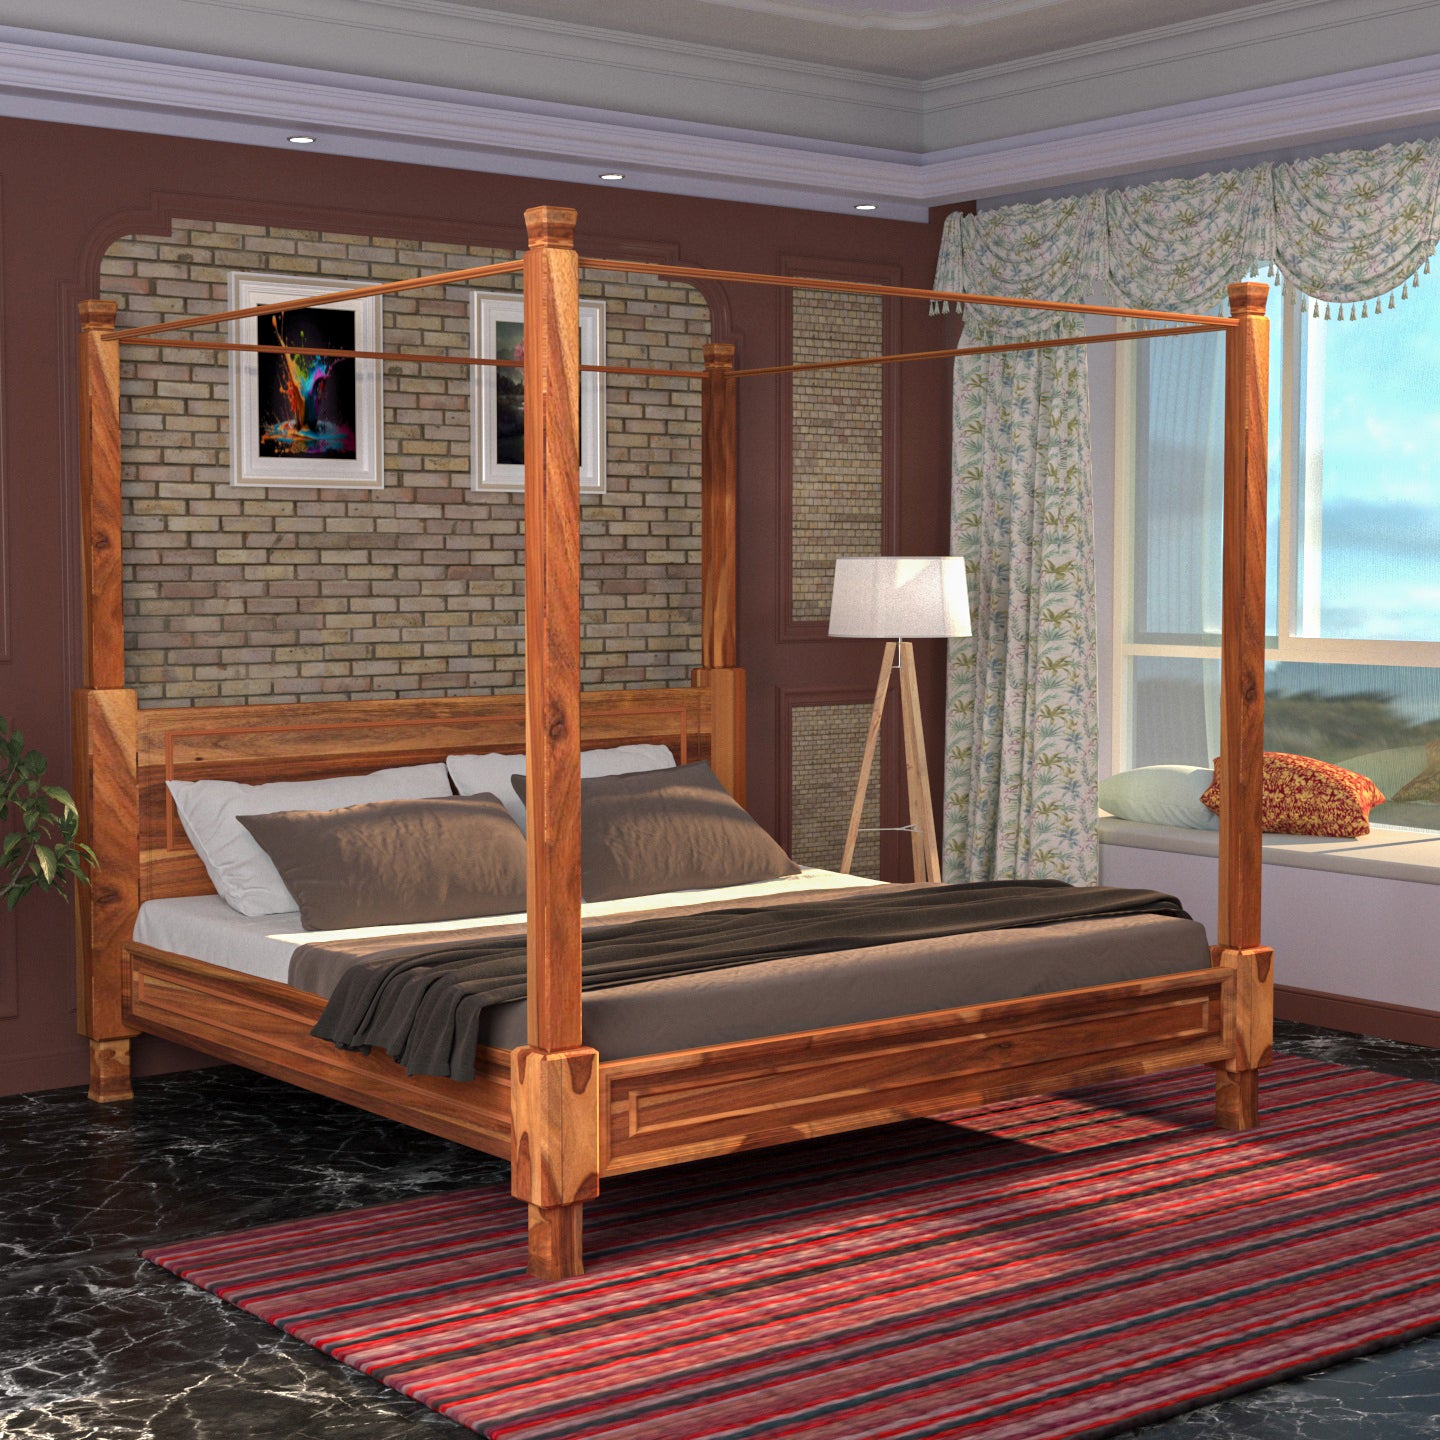 Classic Heritage Look Long Pillar Roof Wooden Vintage Bed Bed